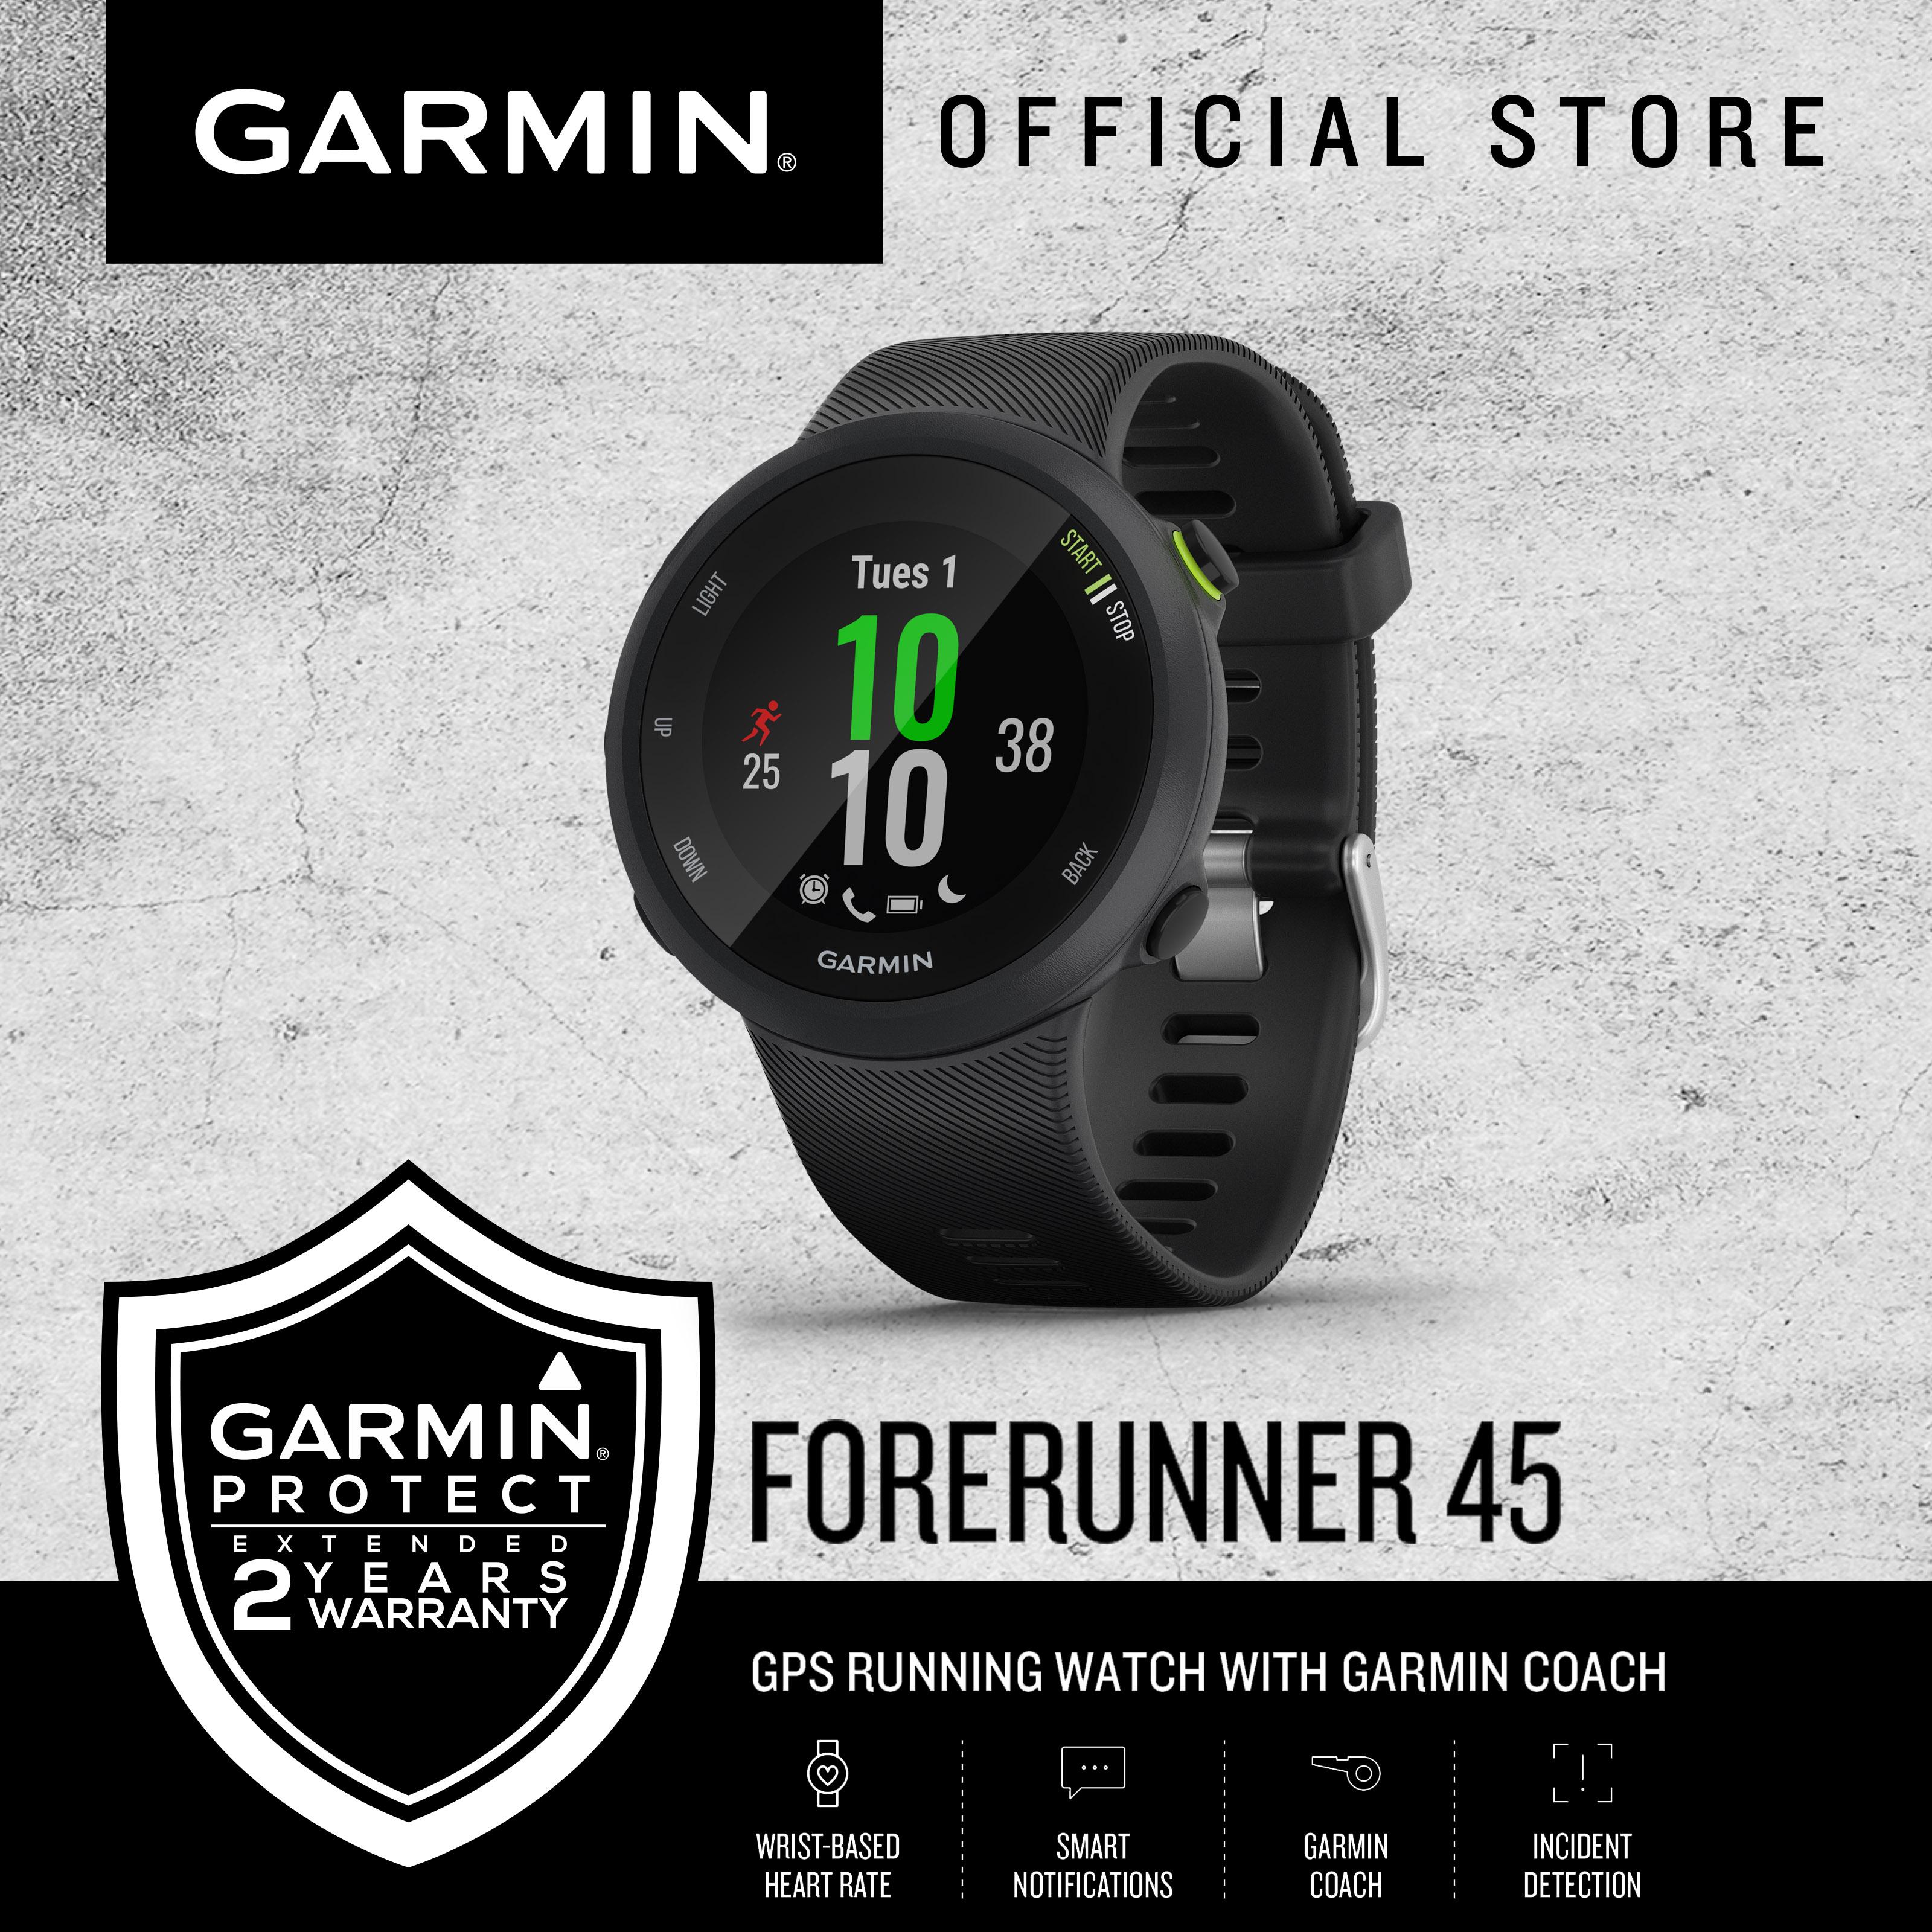 Buy Garmin Top Products Online at Best Price